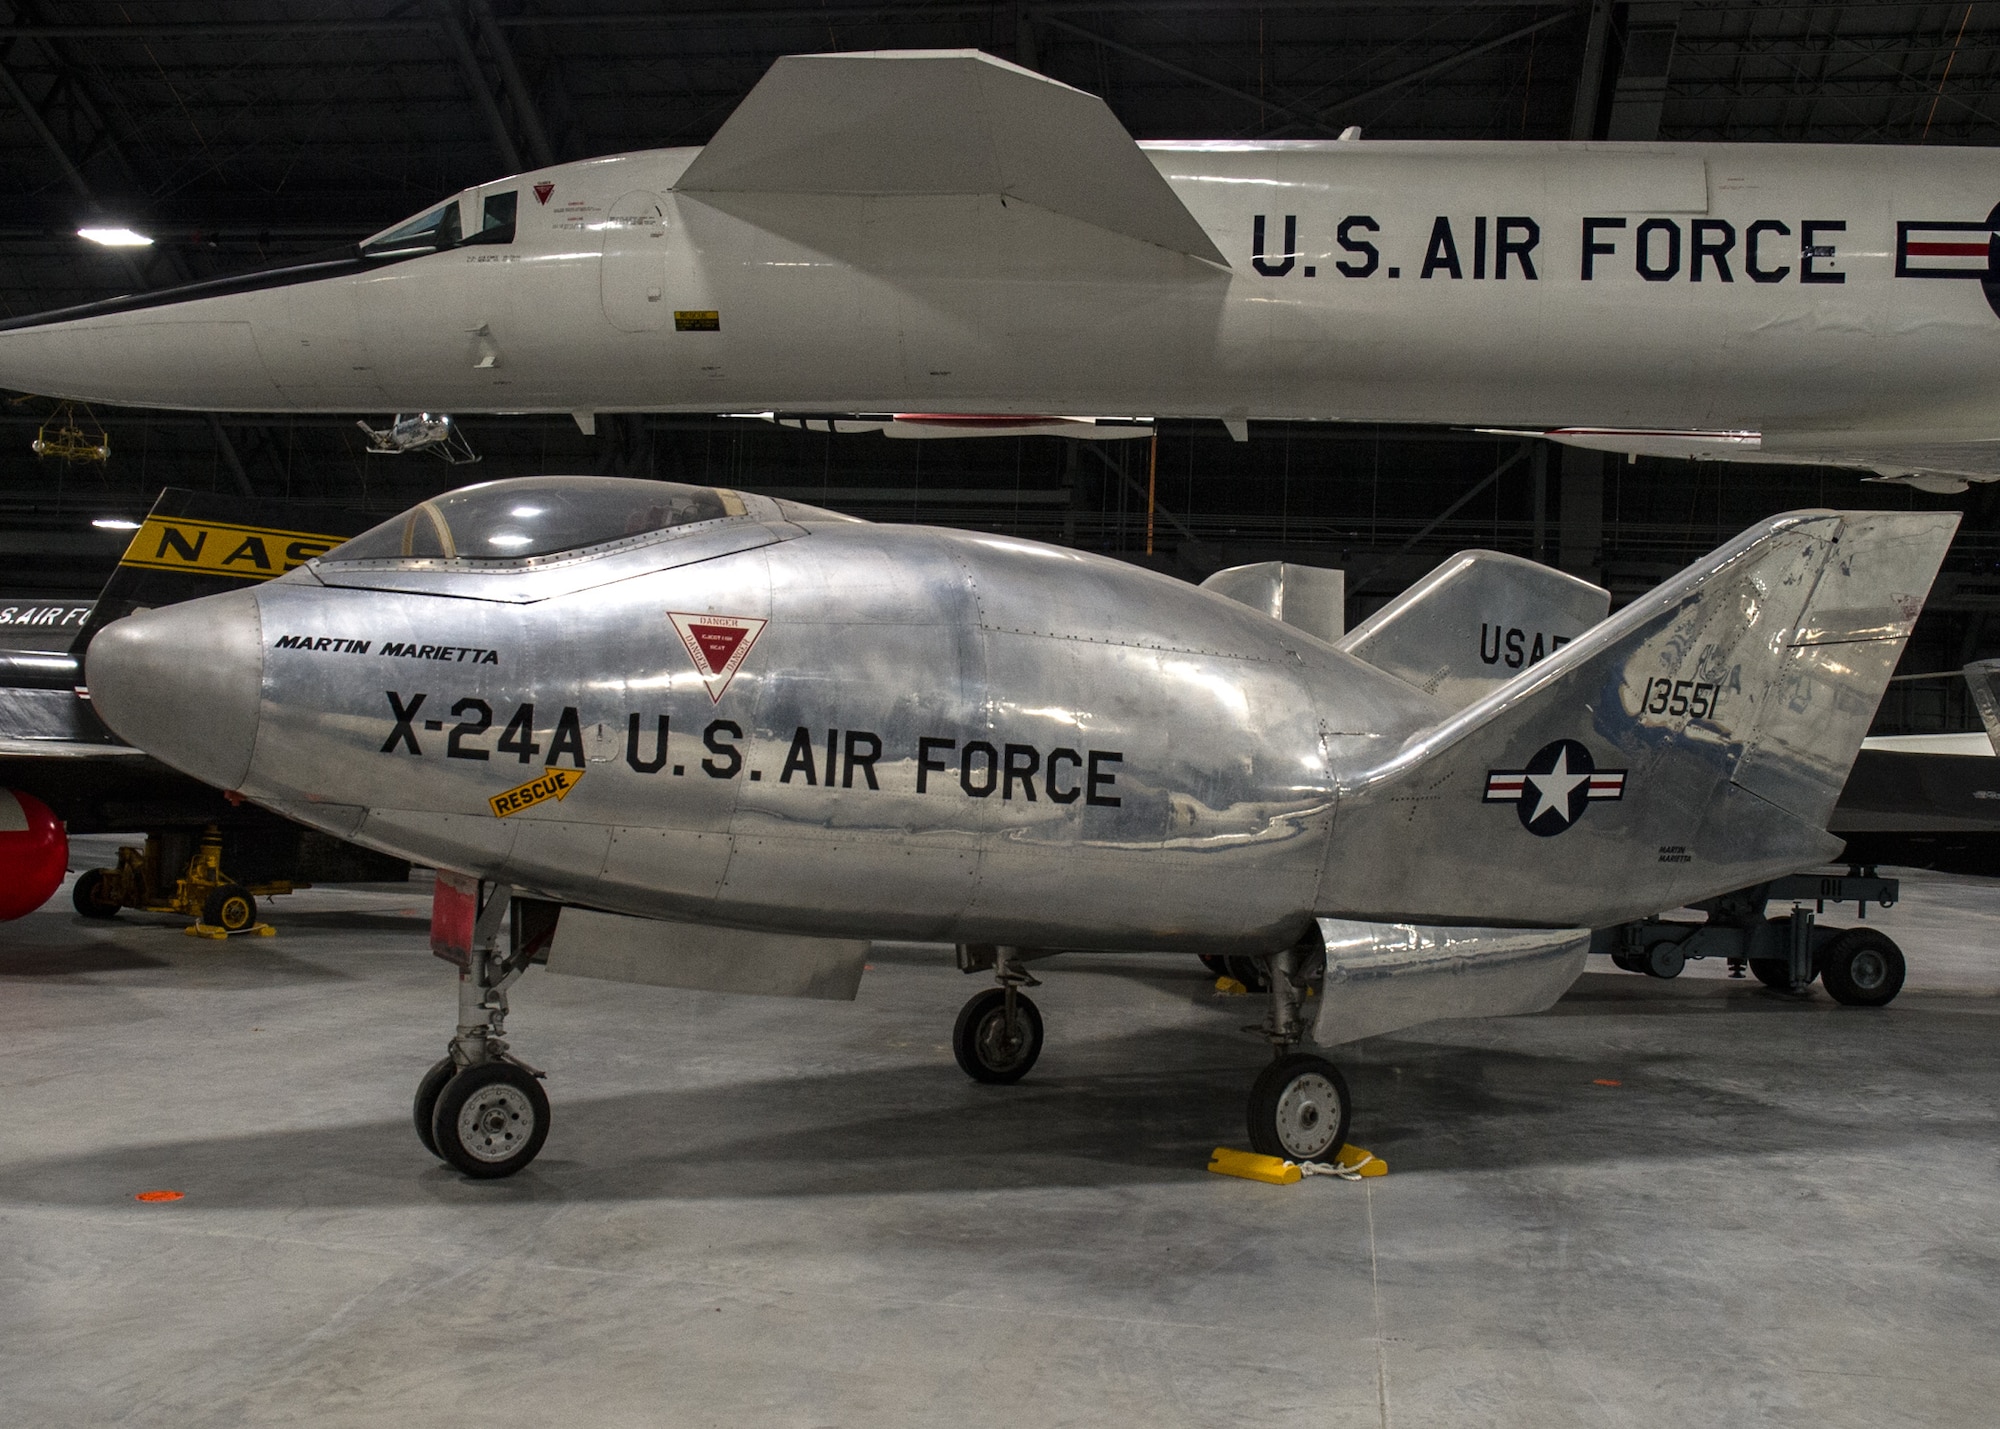 Martin X-24A in the Space Gallery at the National Museum of the U.S. Air Force on December 28, 2015. (U.S. Air Force photo)